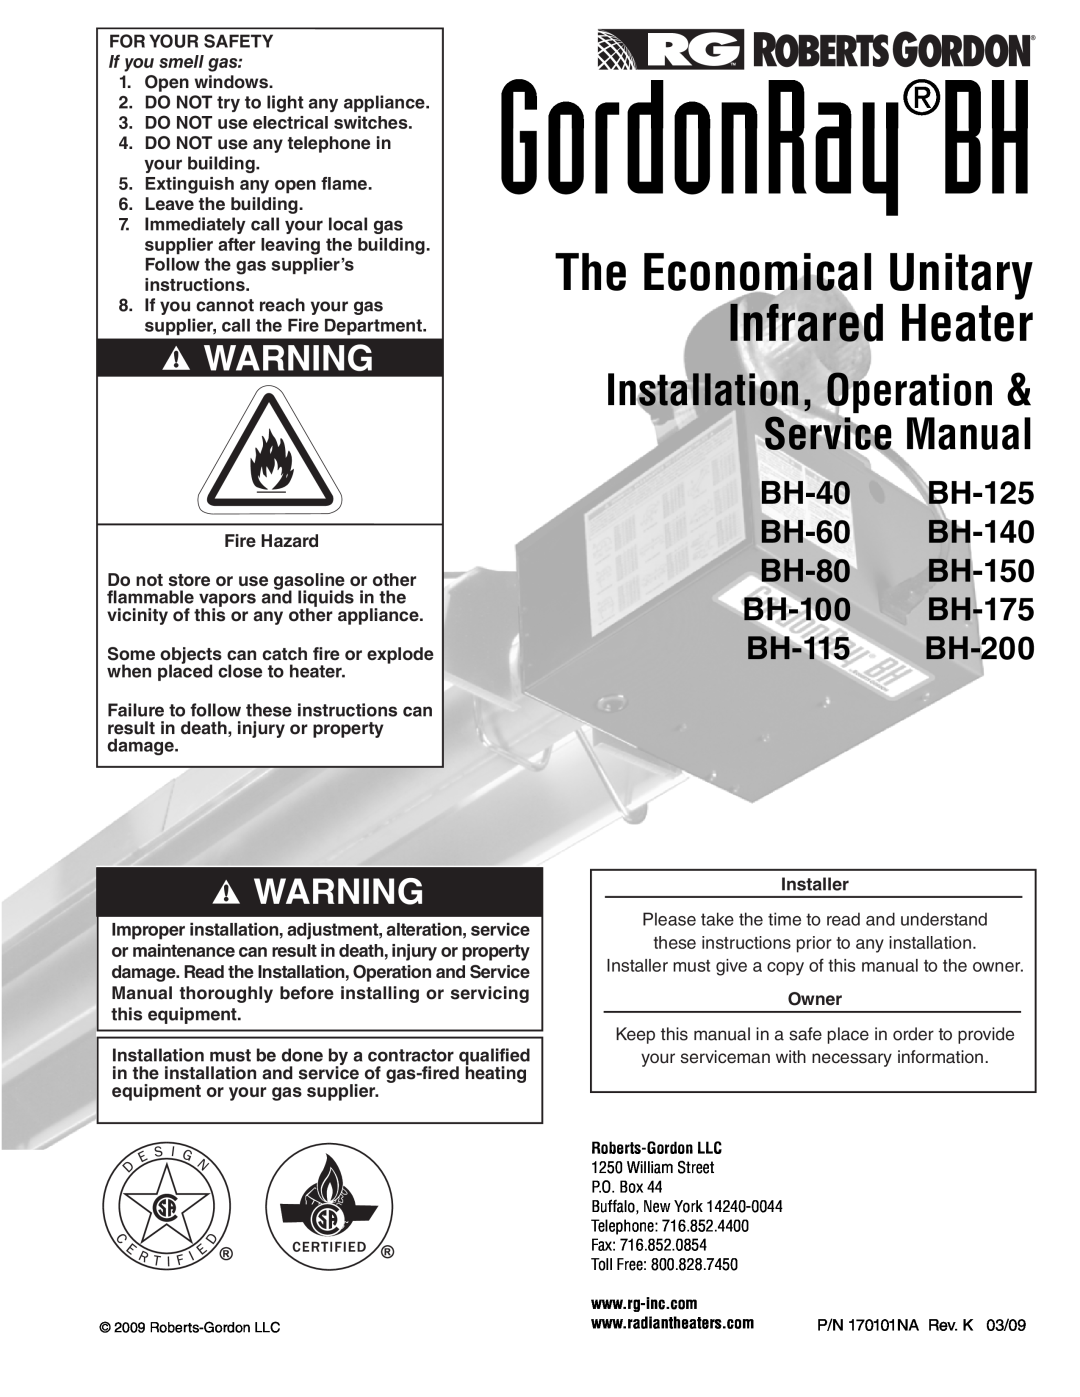 Roberts Gorden BH-40 service manual The Economical Unitary, Infrared Heater, Service Manual, Installation, Operation 